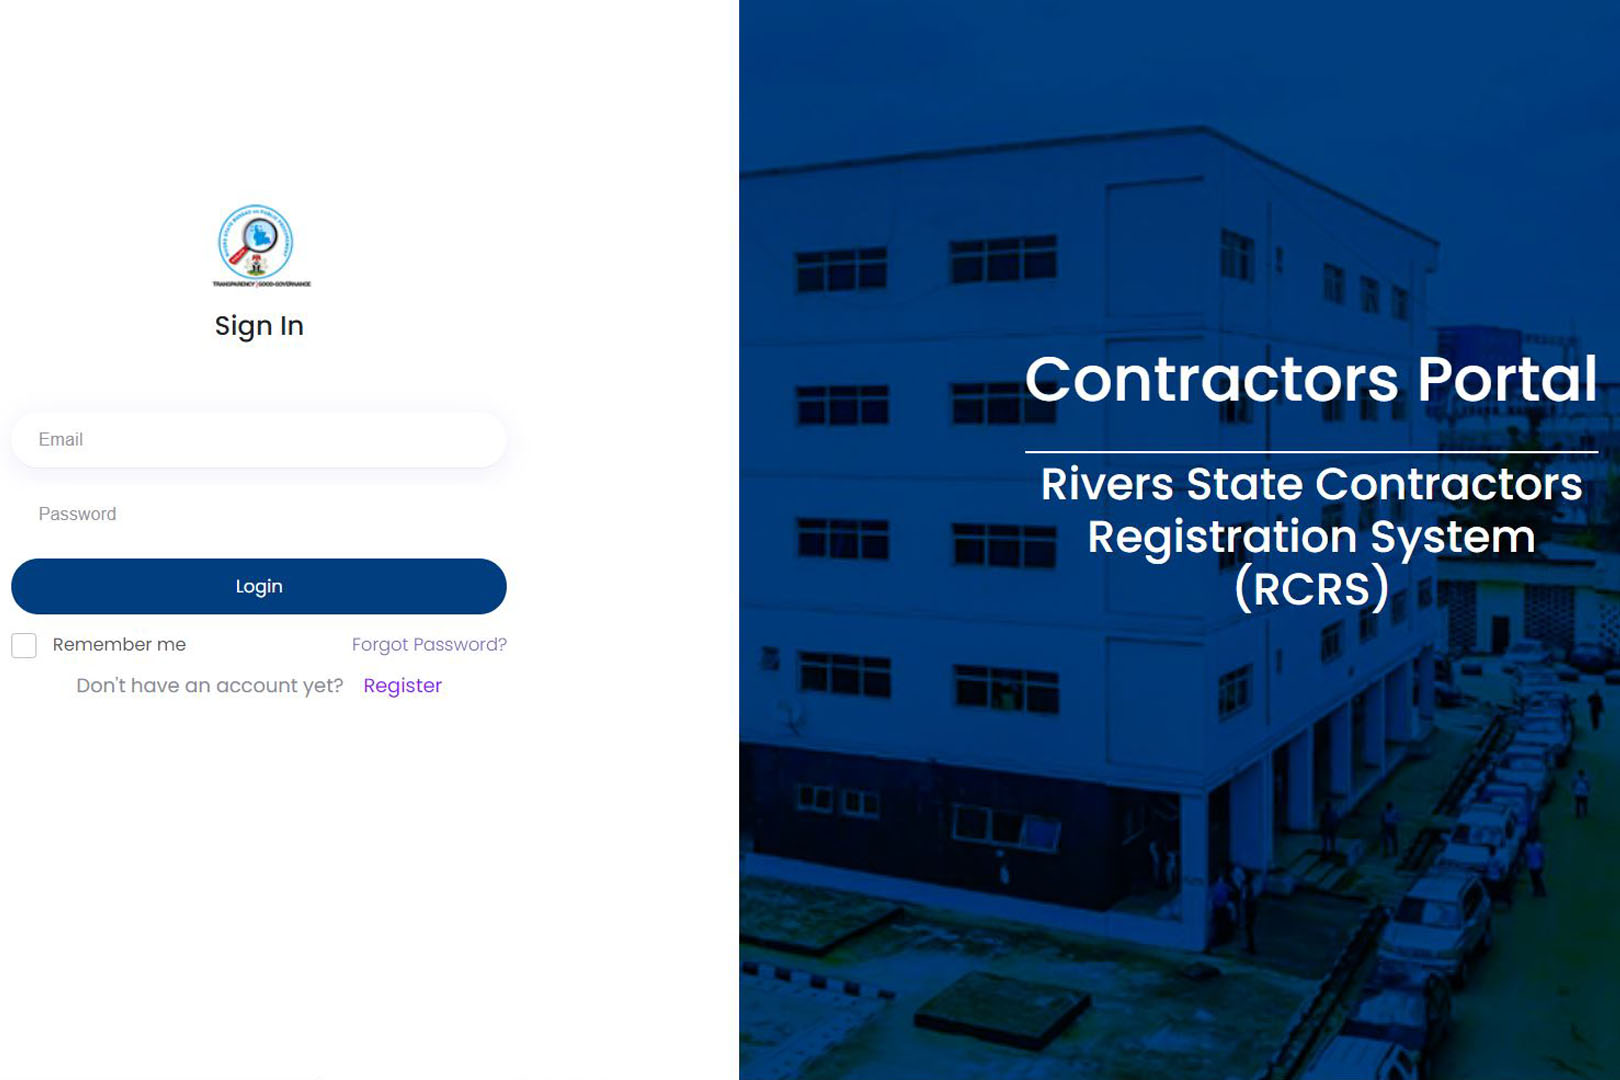 Rivers State Contractors Registration System (RCRS)